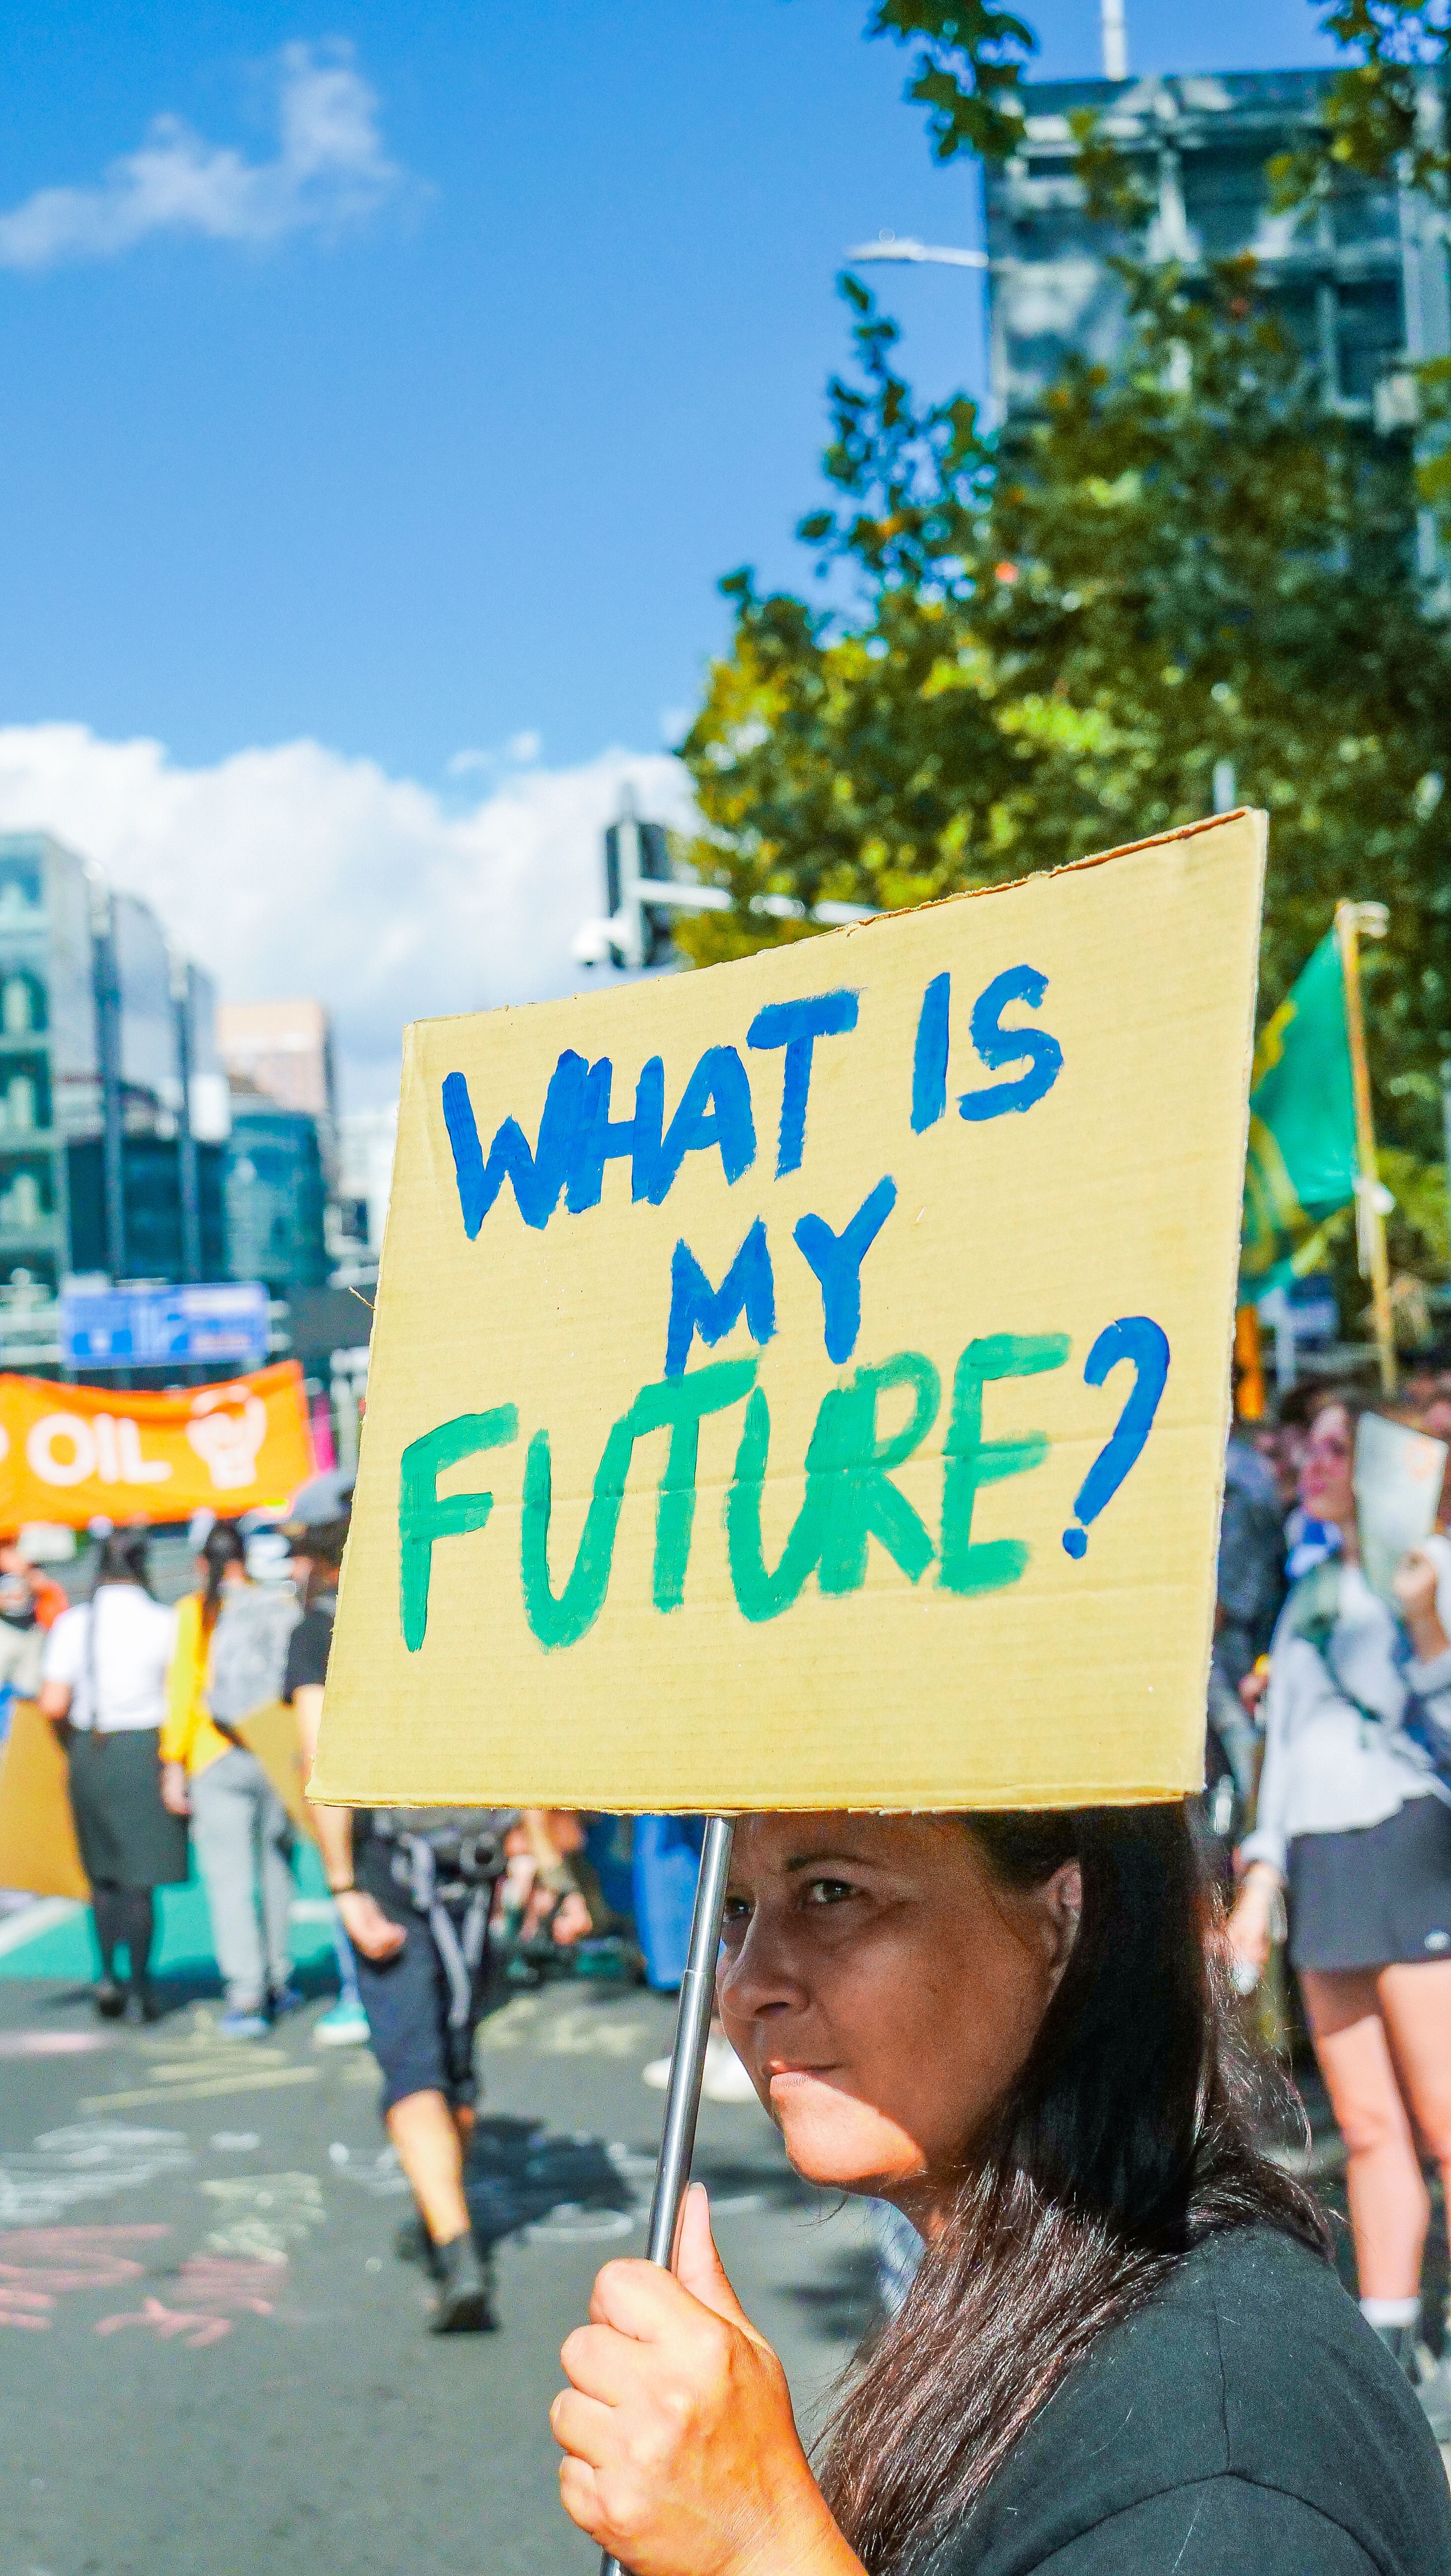 A person at a protest holds a sign that reads "what is my future?"